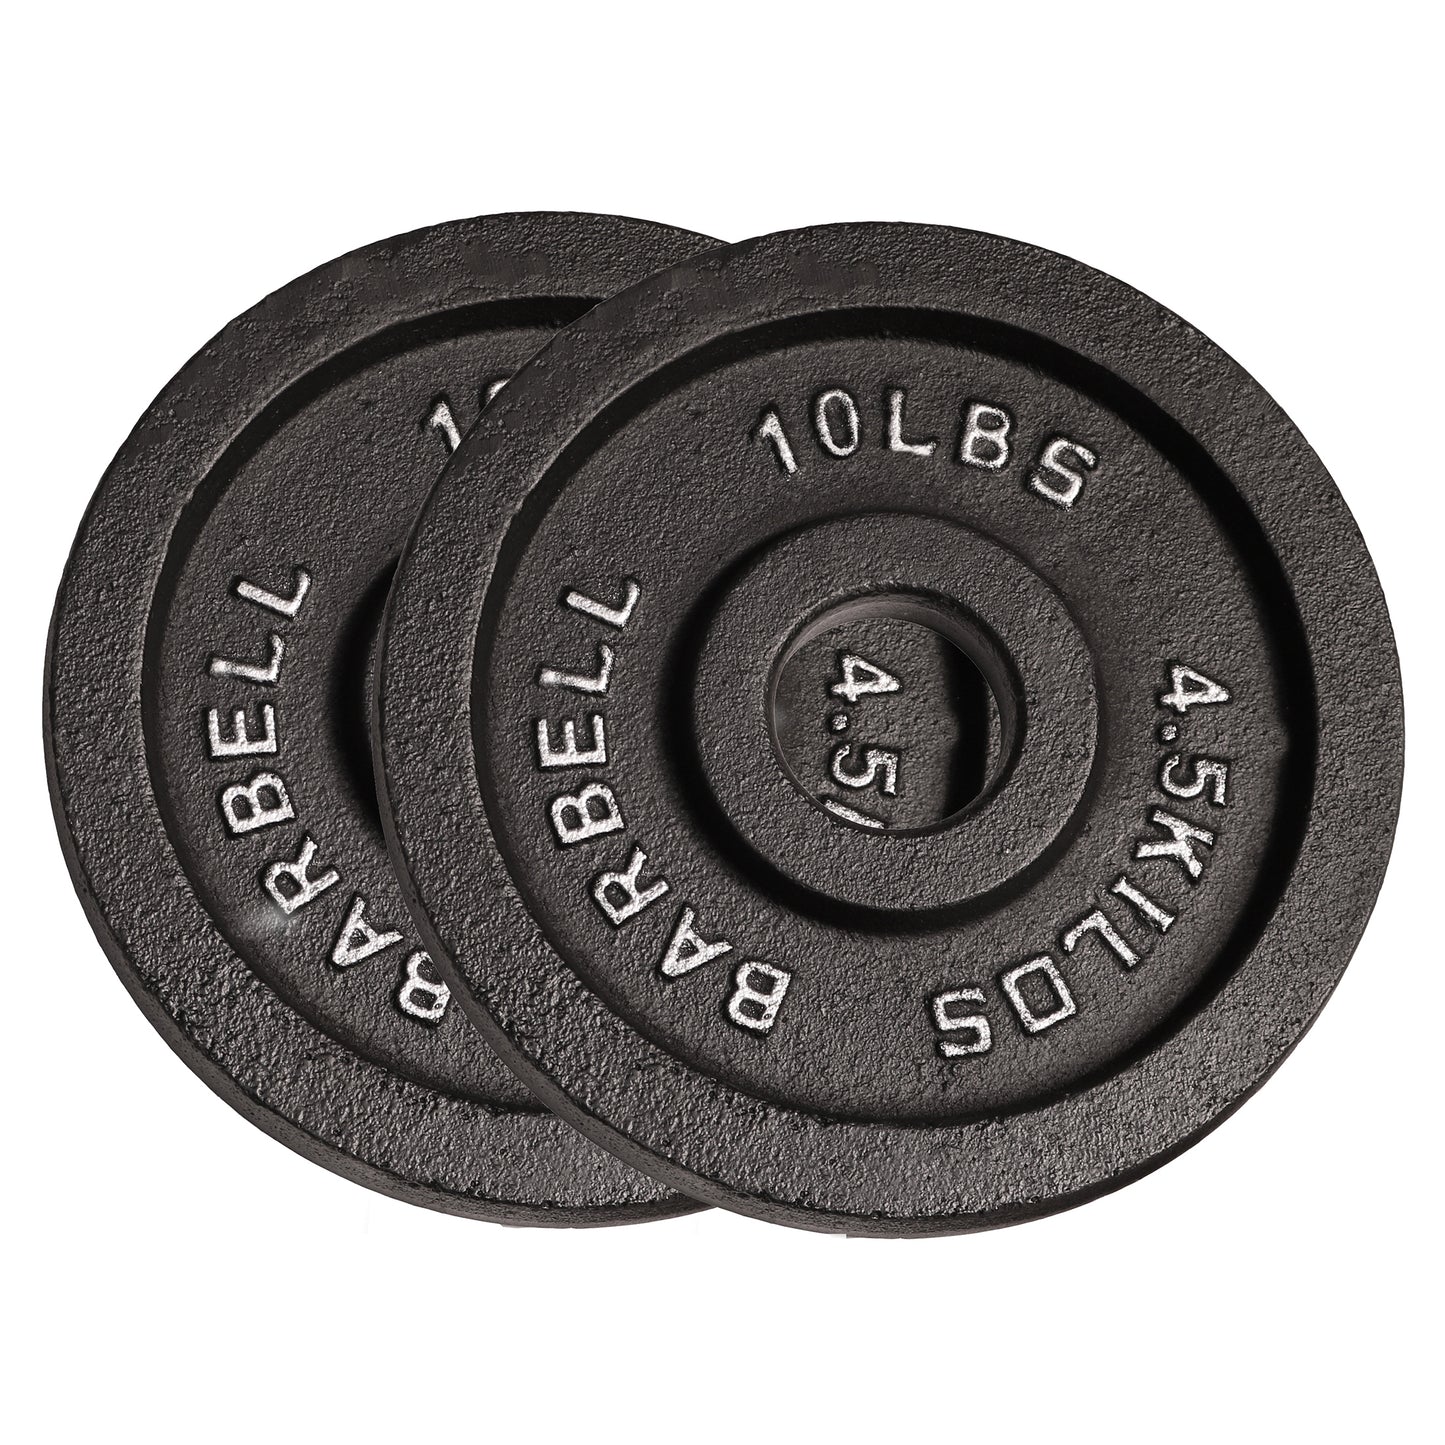 10 lb Pair of Olympic Plates (OP-010)